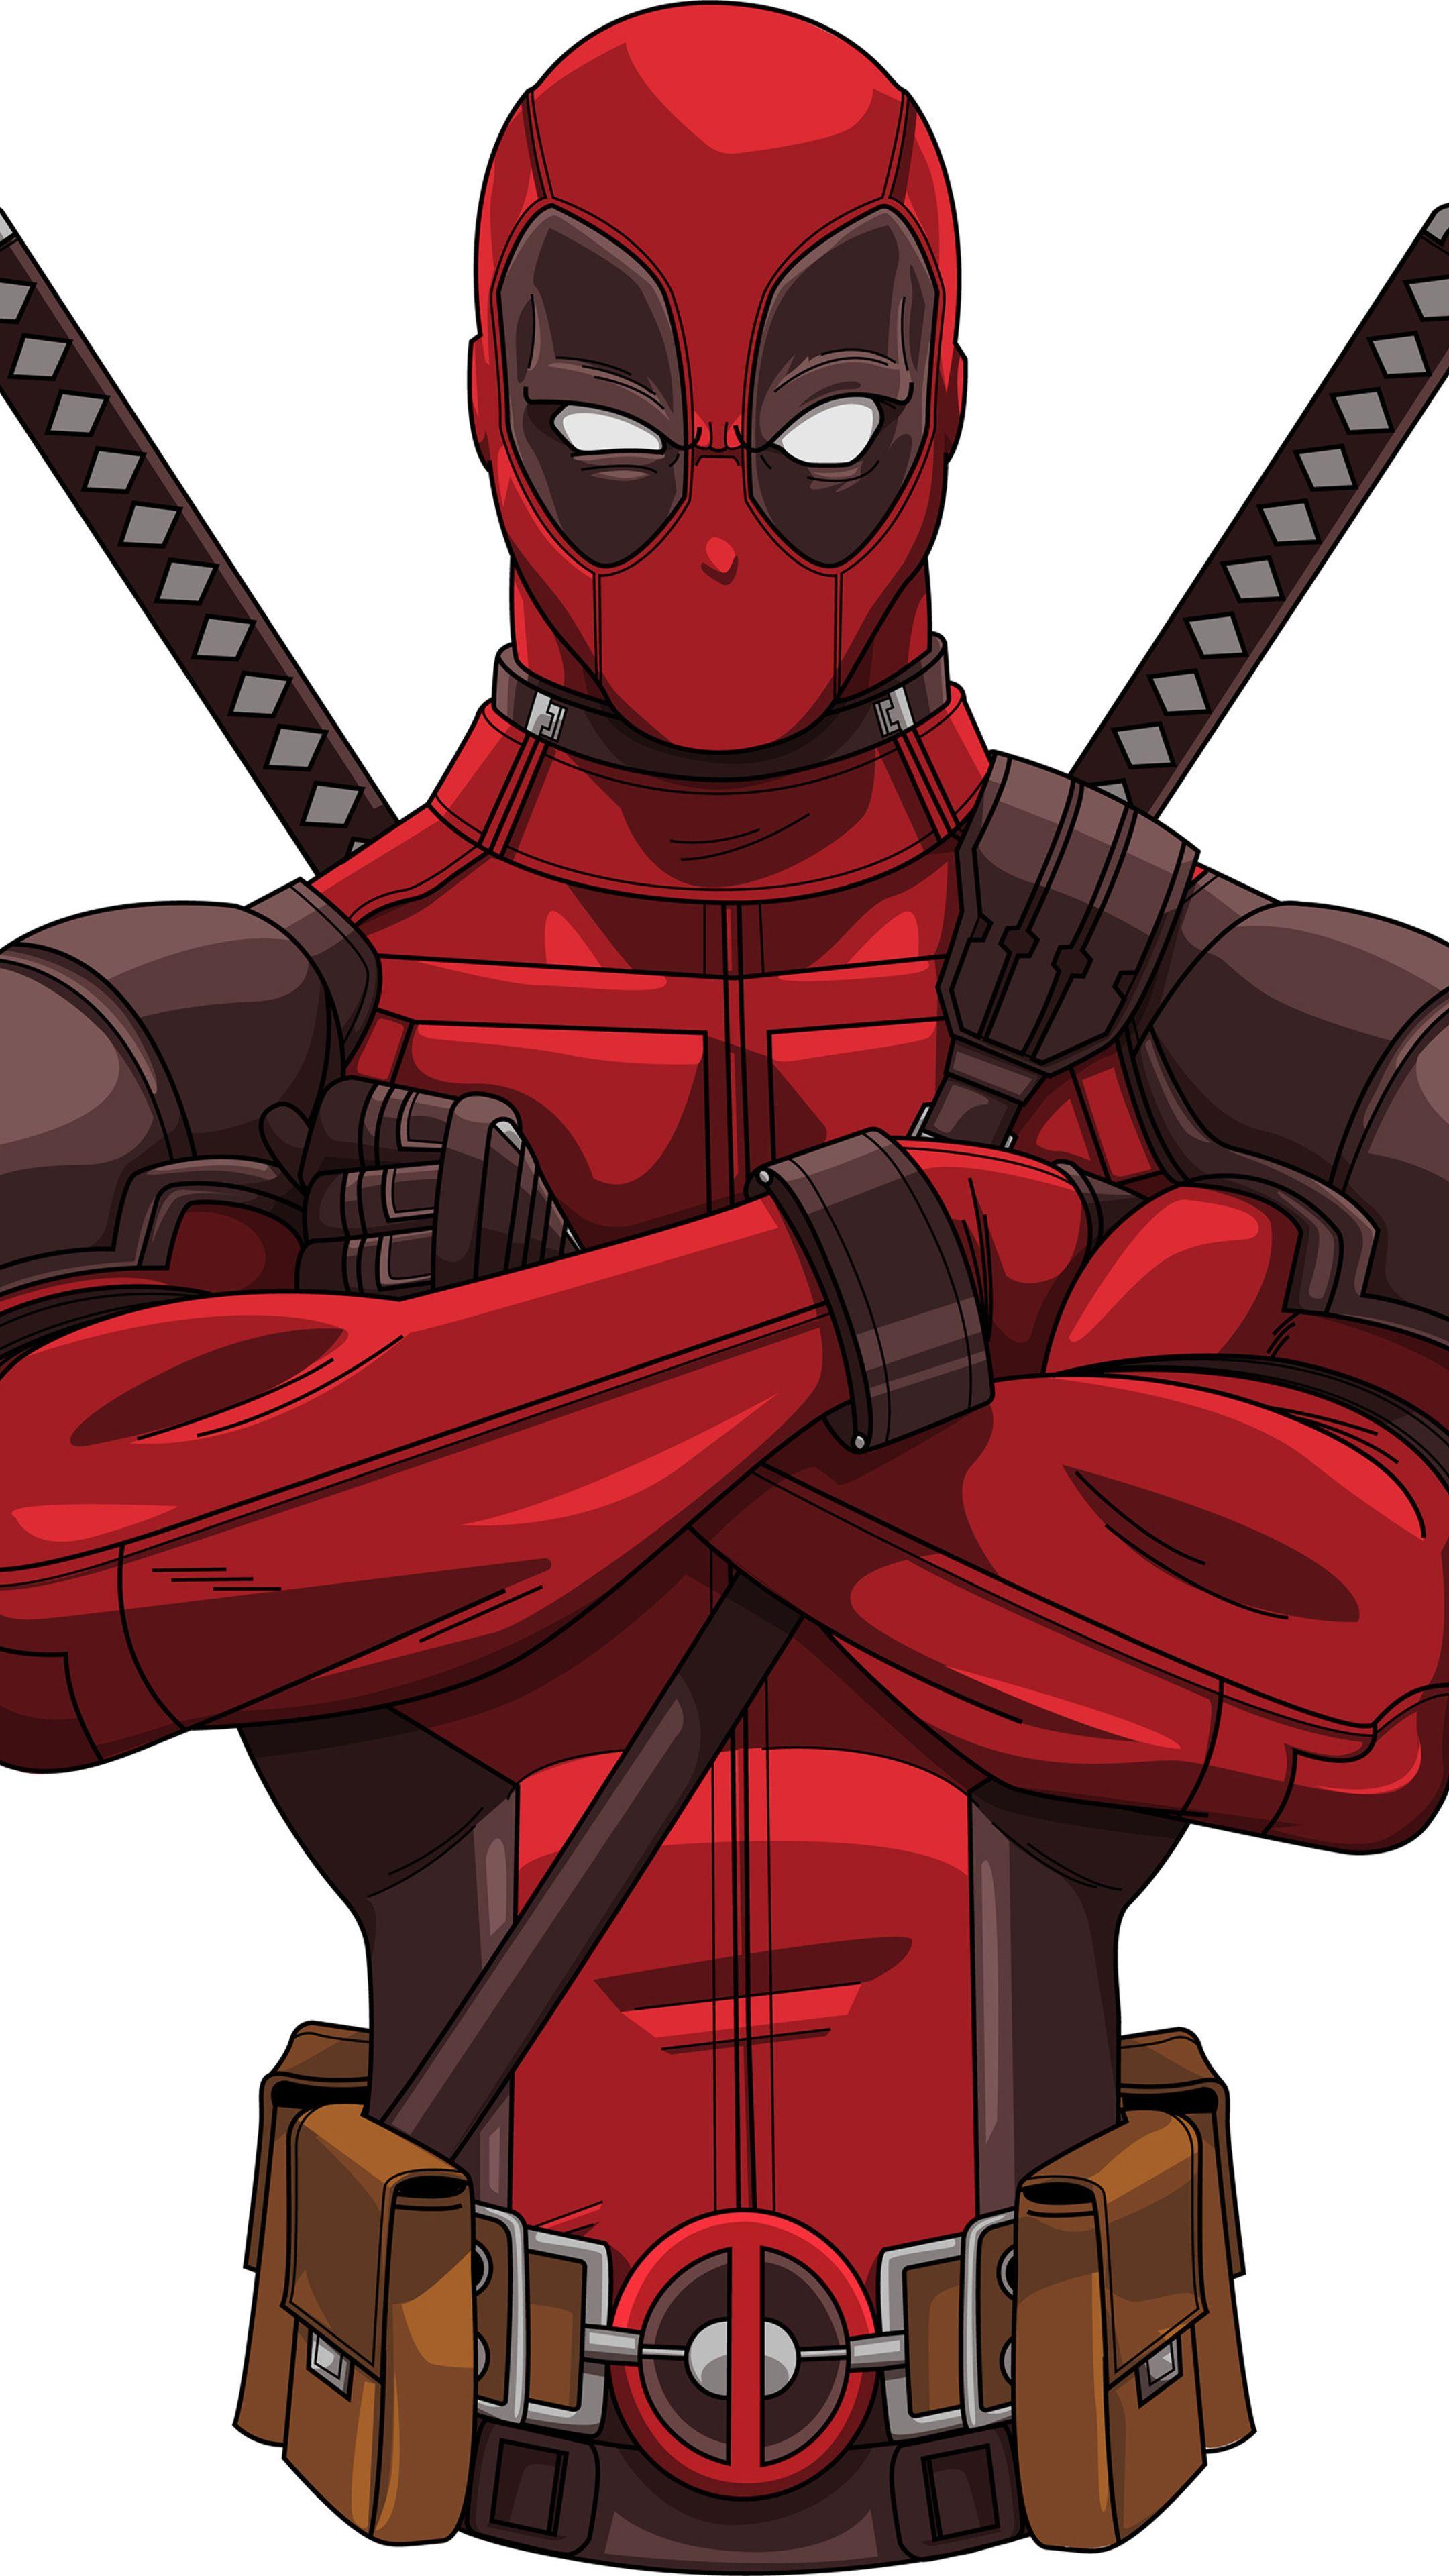 WHICH DEADPOOL CHARACTER ARE YOU?